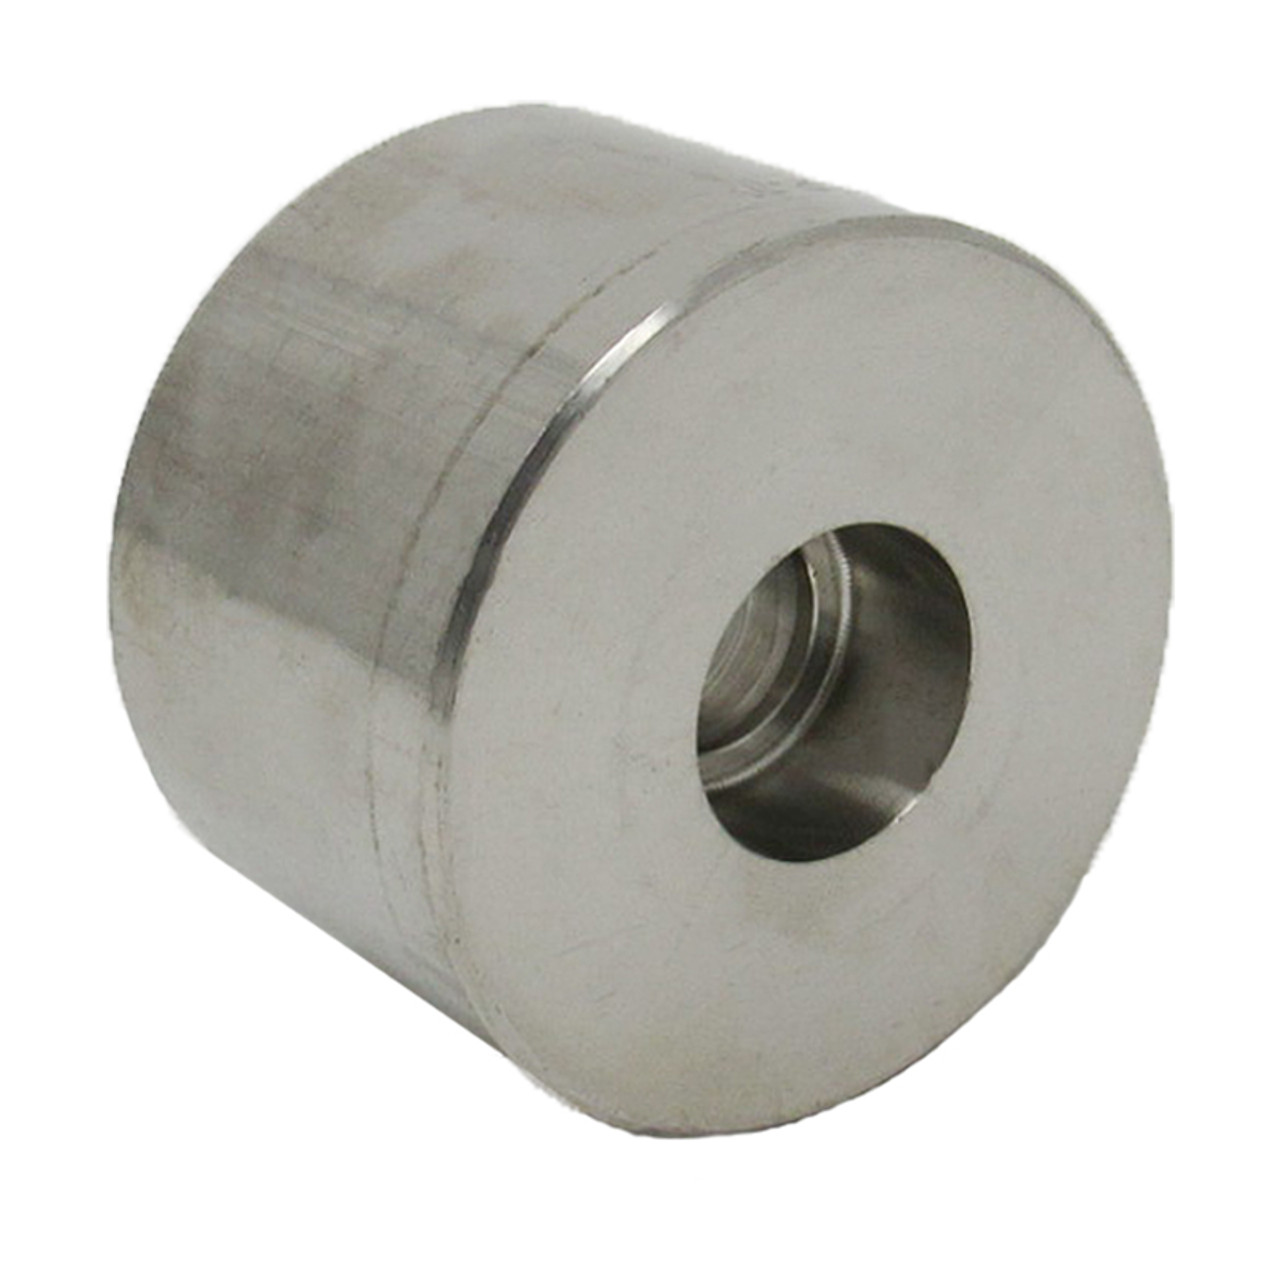 3/4 x 3/8 Insert Reducer, Socket Weld Stainless Steel 304/304L A